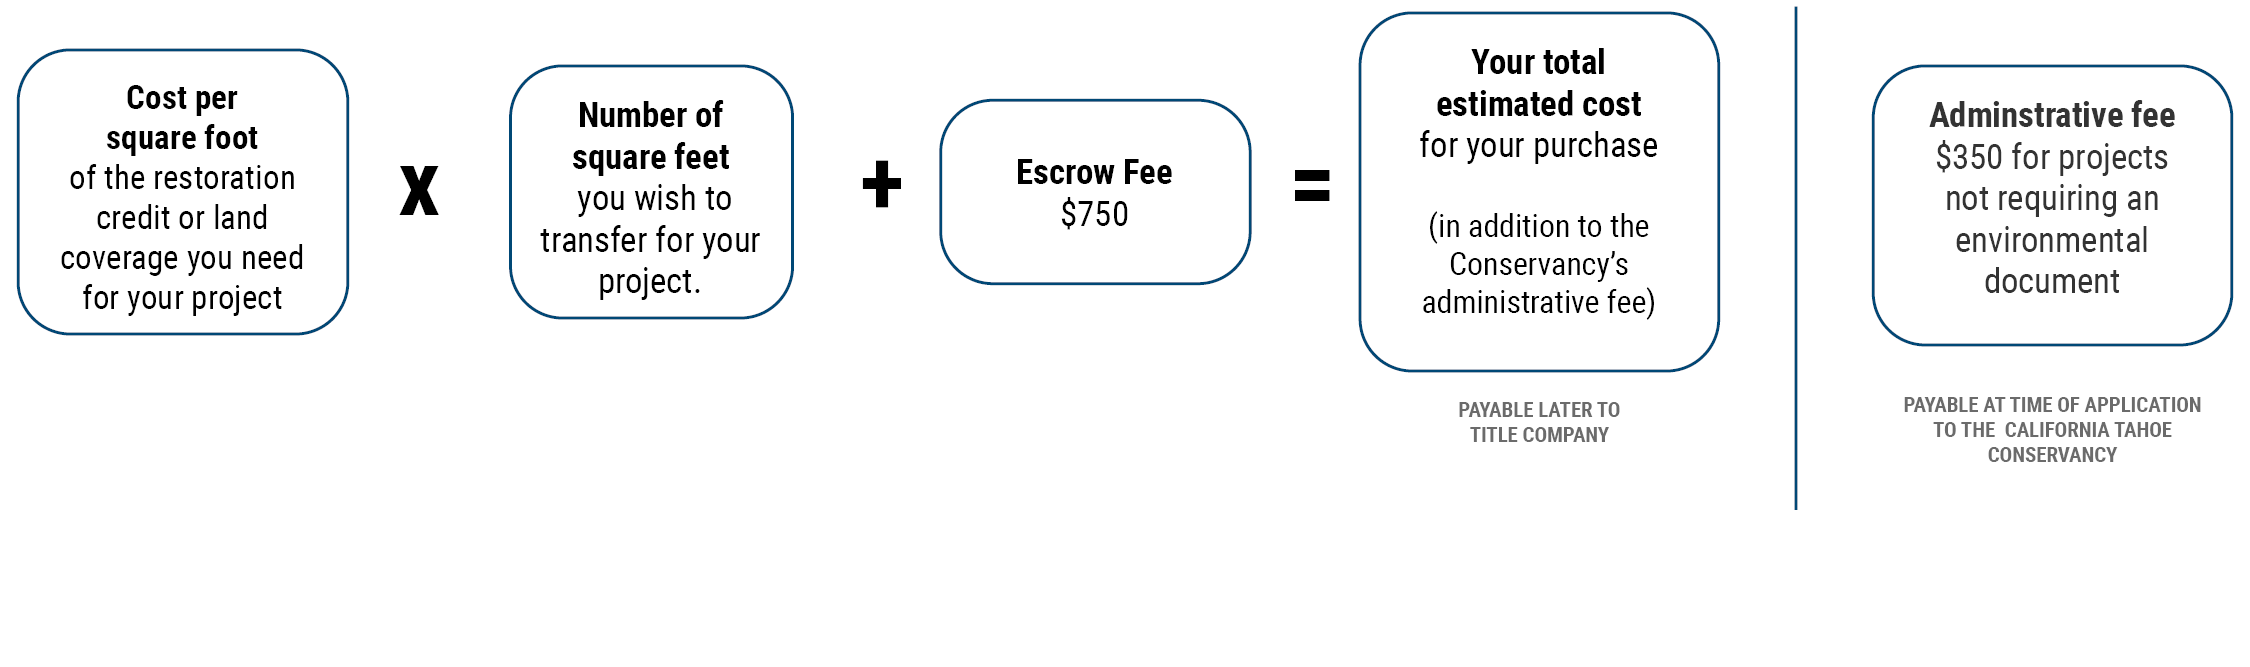 Schematic explaining the costs for varying types and sizes of land coverage purchases, noting that there is also an administrative fee due to the California Tahoe Conservancy.